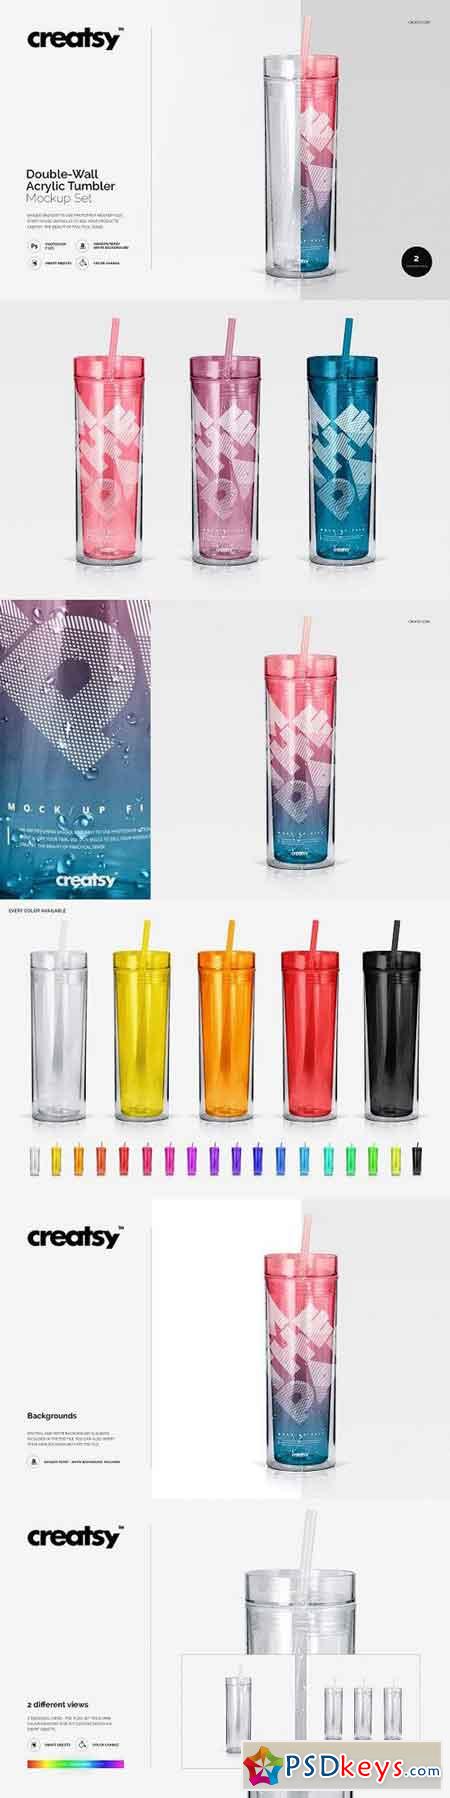 Download Double-Wall Acrylic Tumbler Mockup 1196859 » Free Download ...